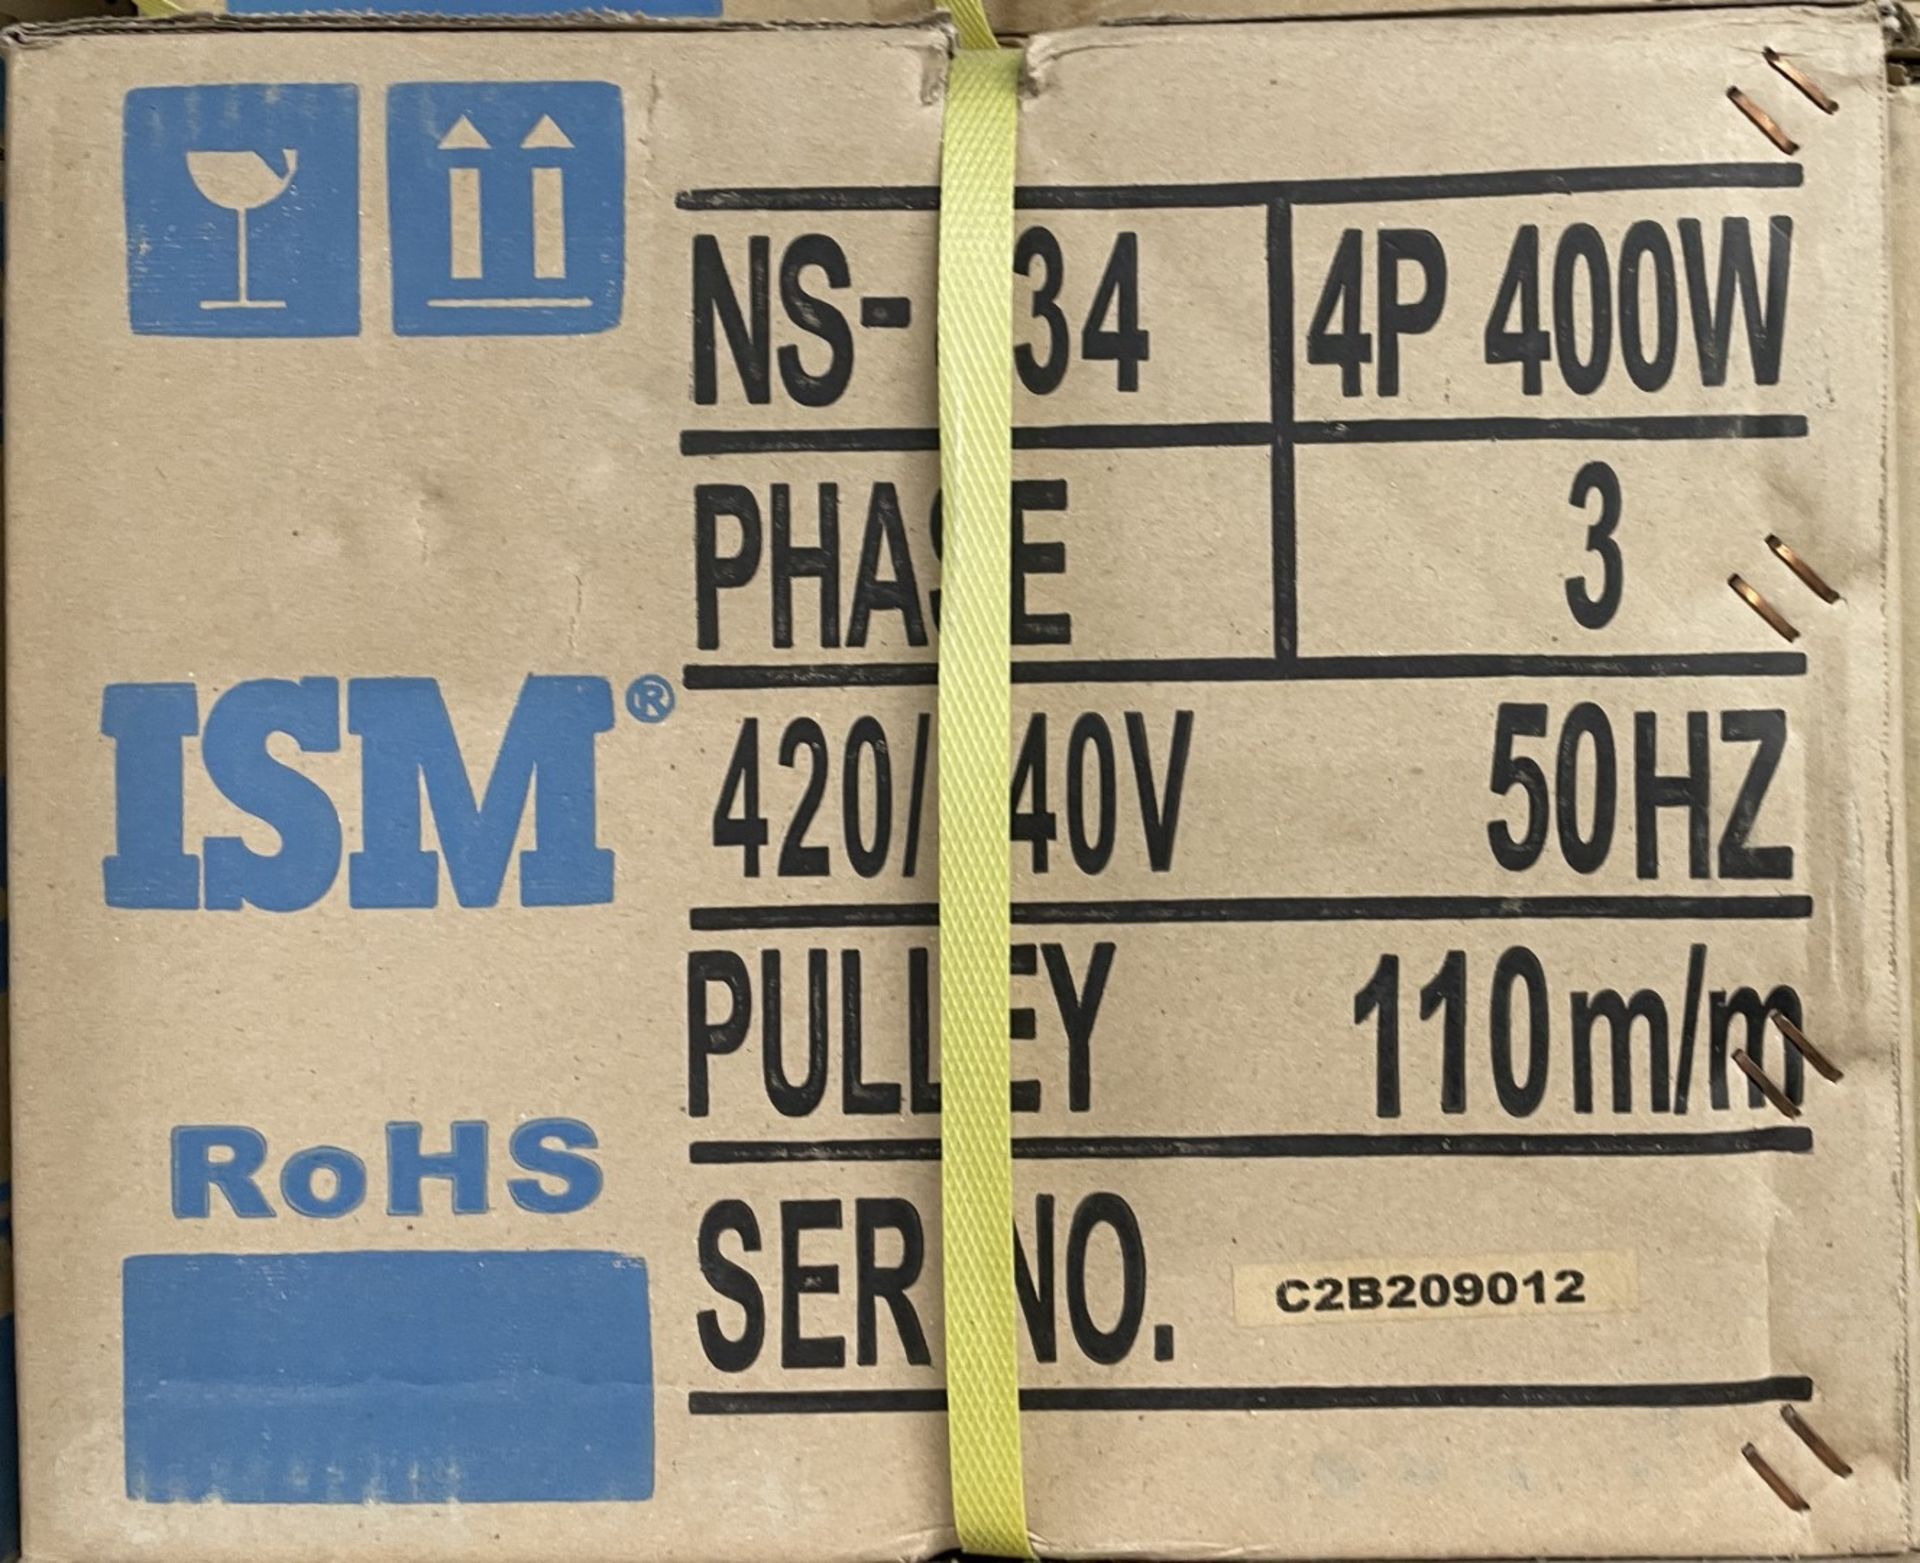 1 x ISM NS-434 Sewing Machine Clutch Motor - 3 Phase 420/440V 4P 400W - New Boxed Stock - Ref: R05DR - Image 2 of 8